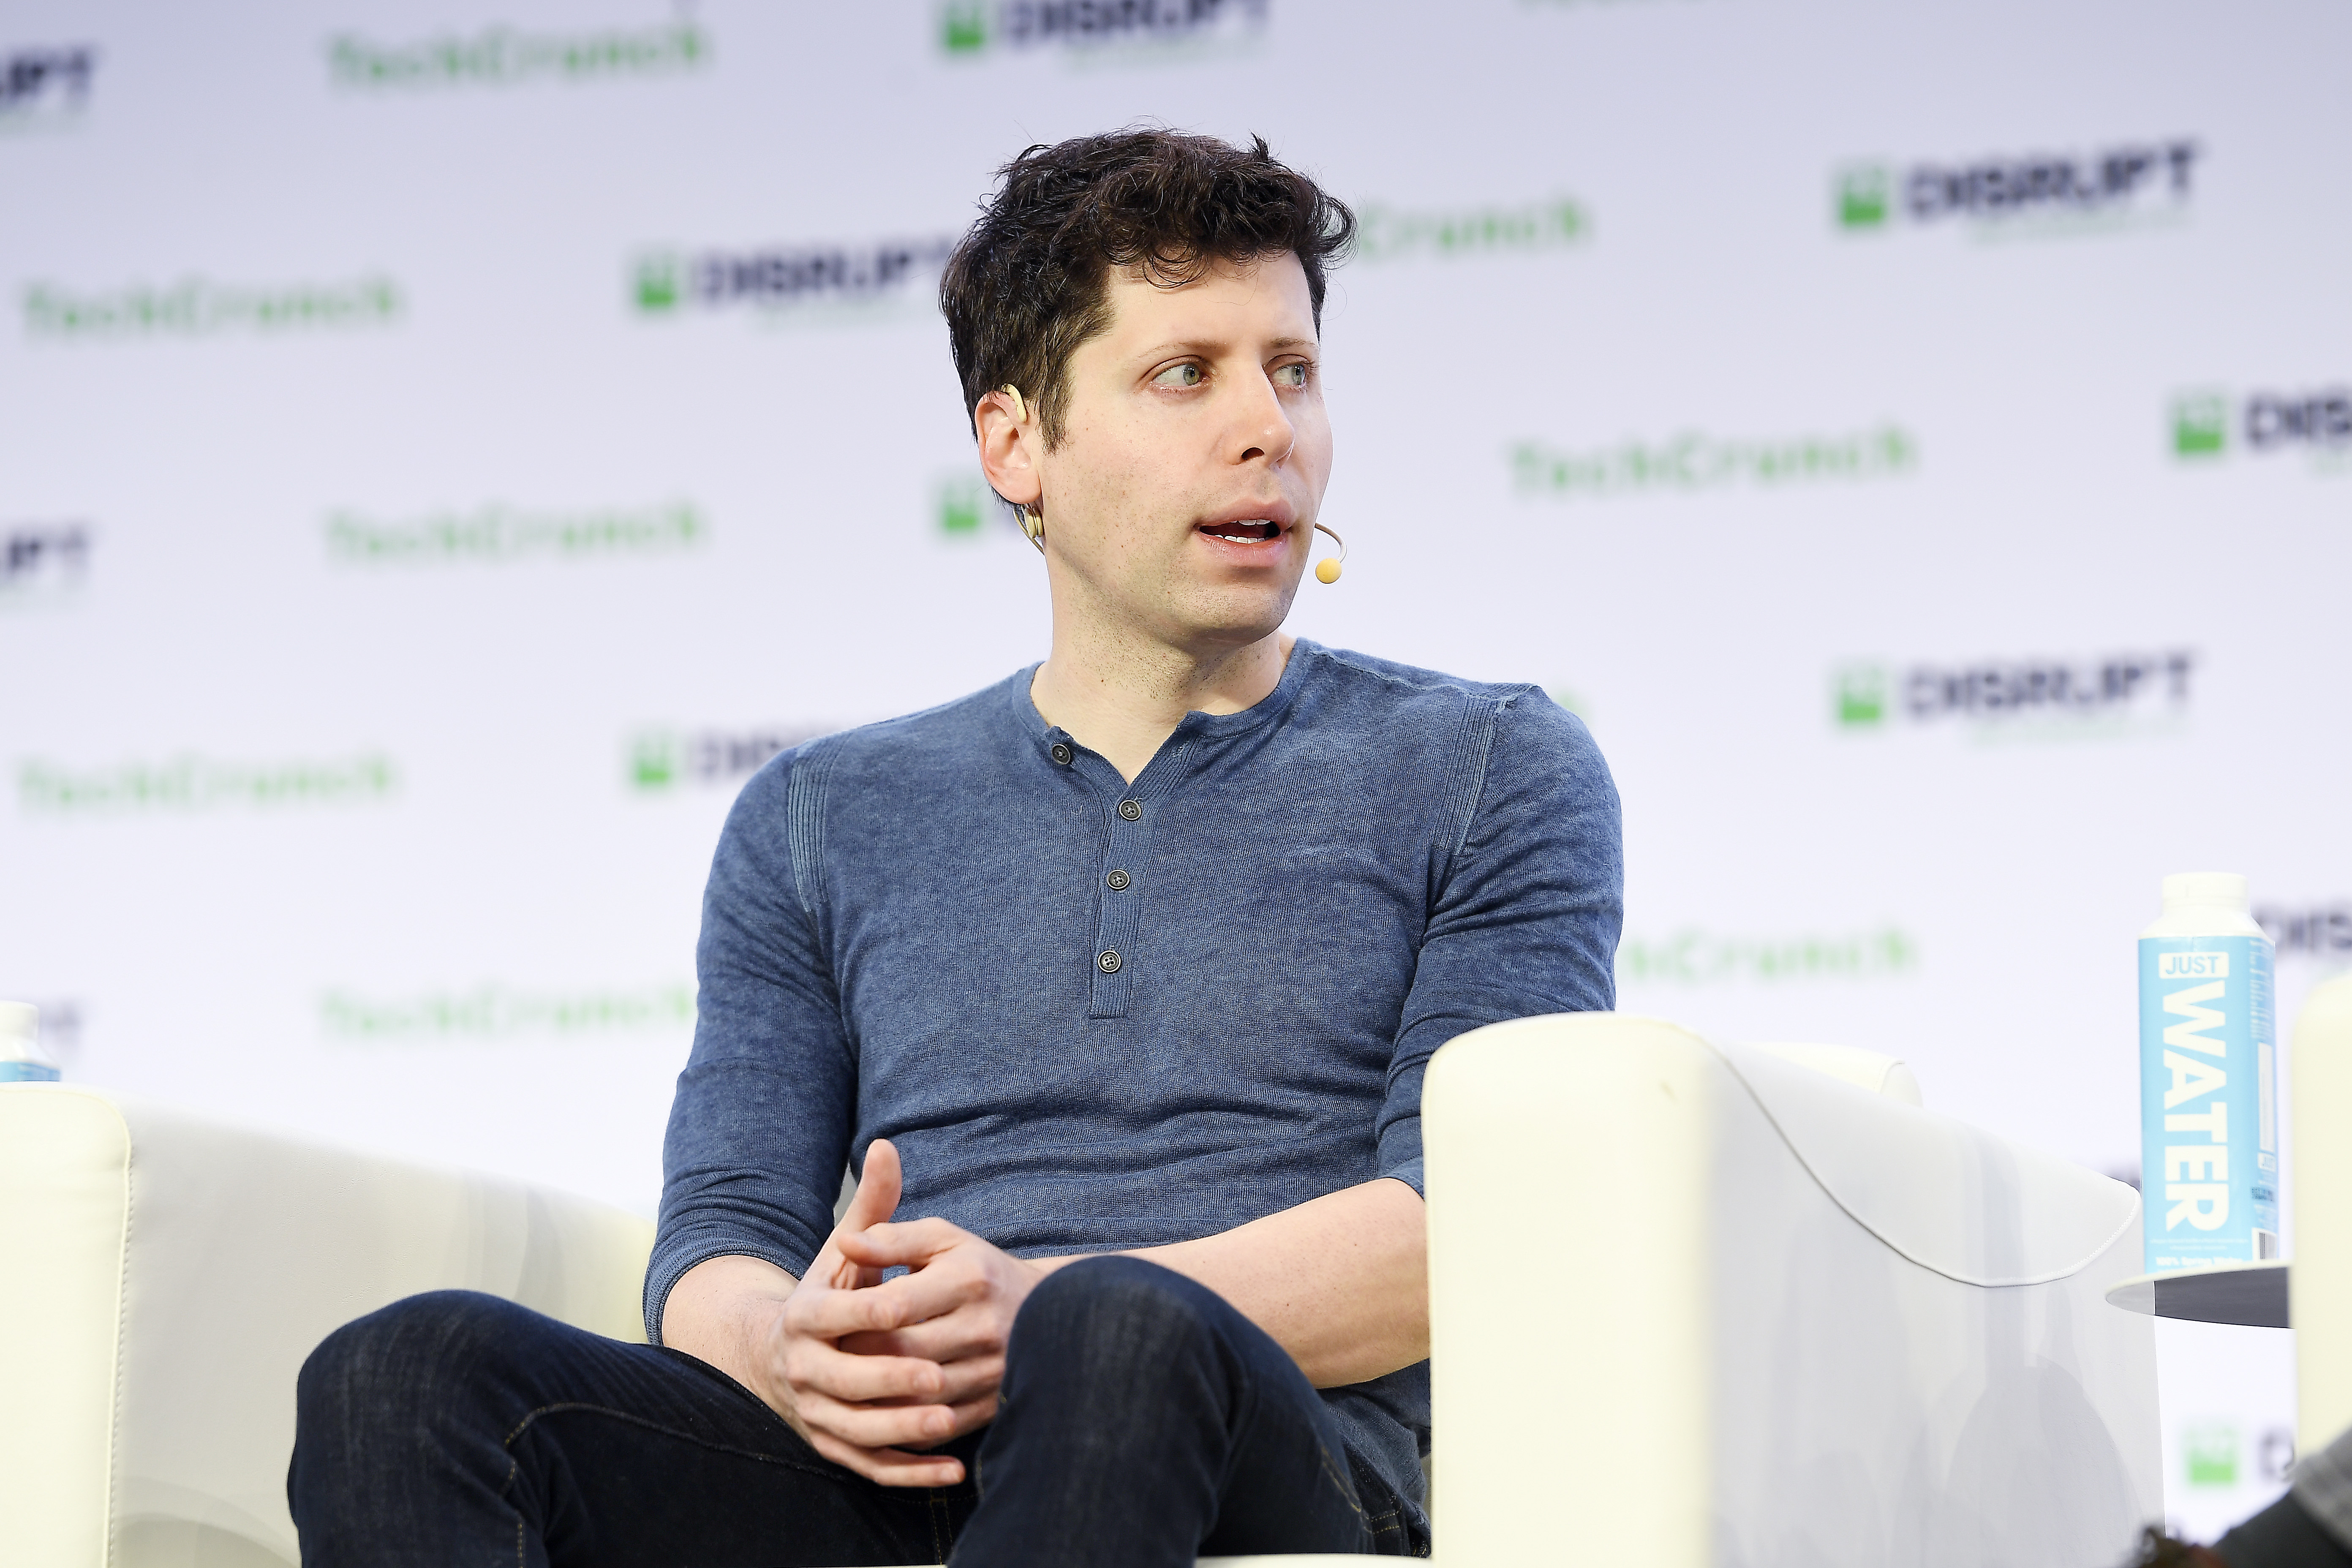 A photo of Sam Altman sitting in a chair on a stage